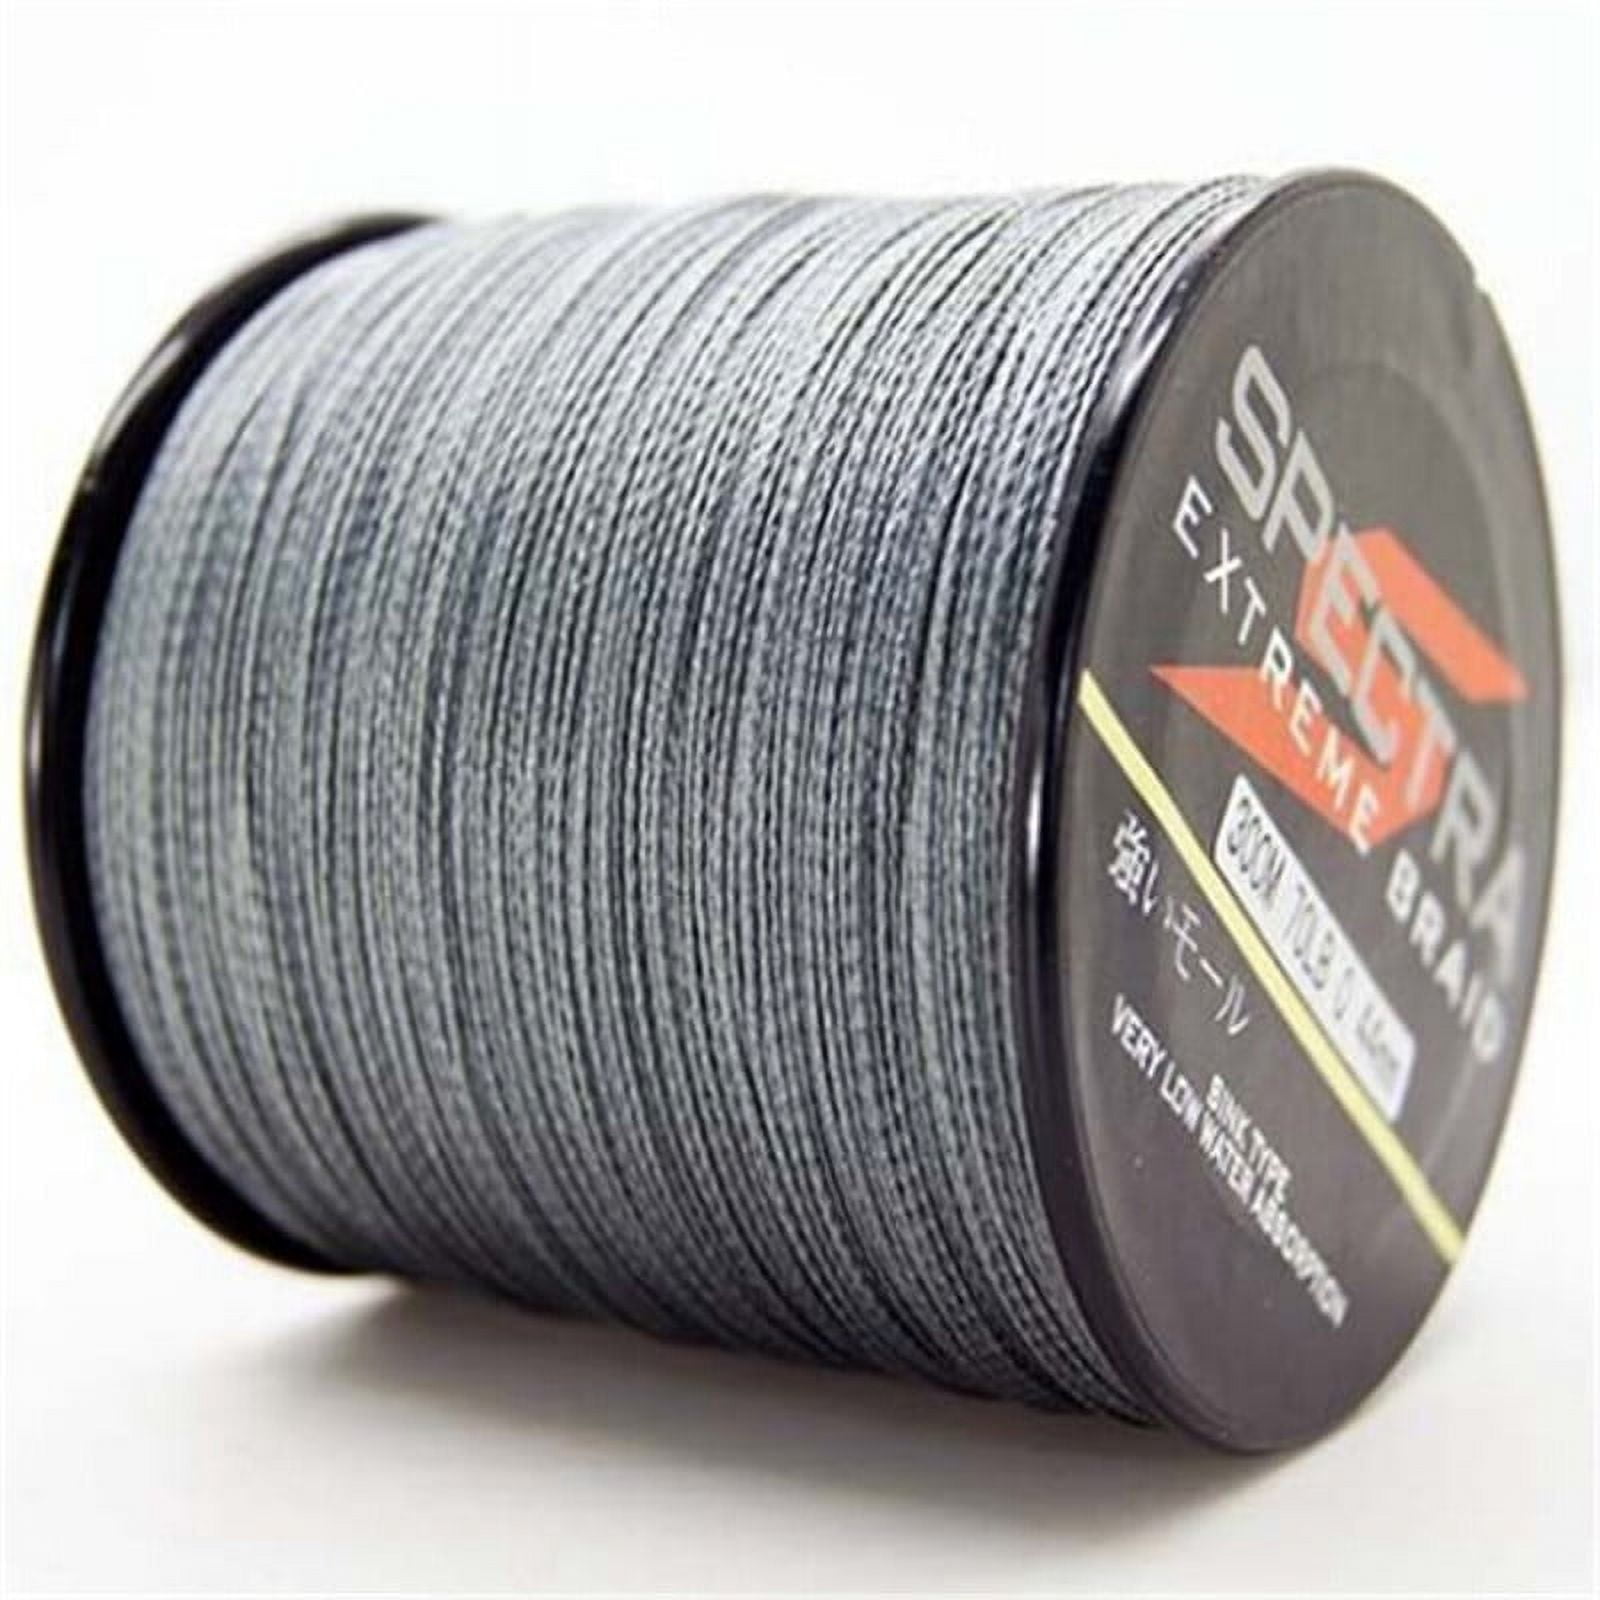 Extreme Braid 100% Pe multicolour Braided Fishing Line 109Yards-547Yards /  6-100Lb Test Fishing Wire Fishing String Incredible Superline Zero Stretch